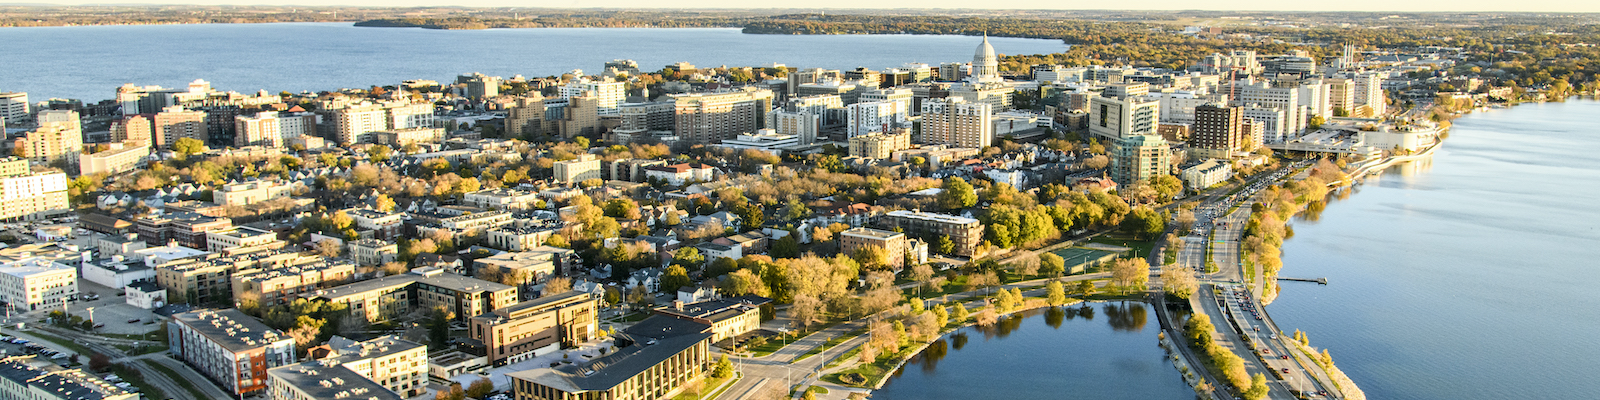 Aerial view of the Madison Isthmus with the capital